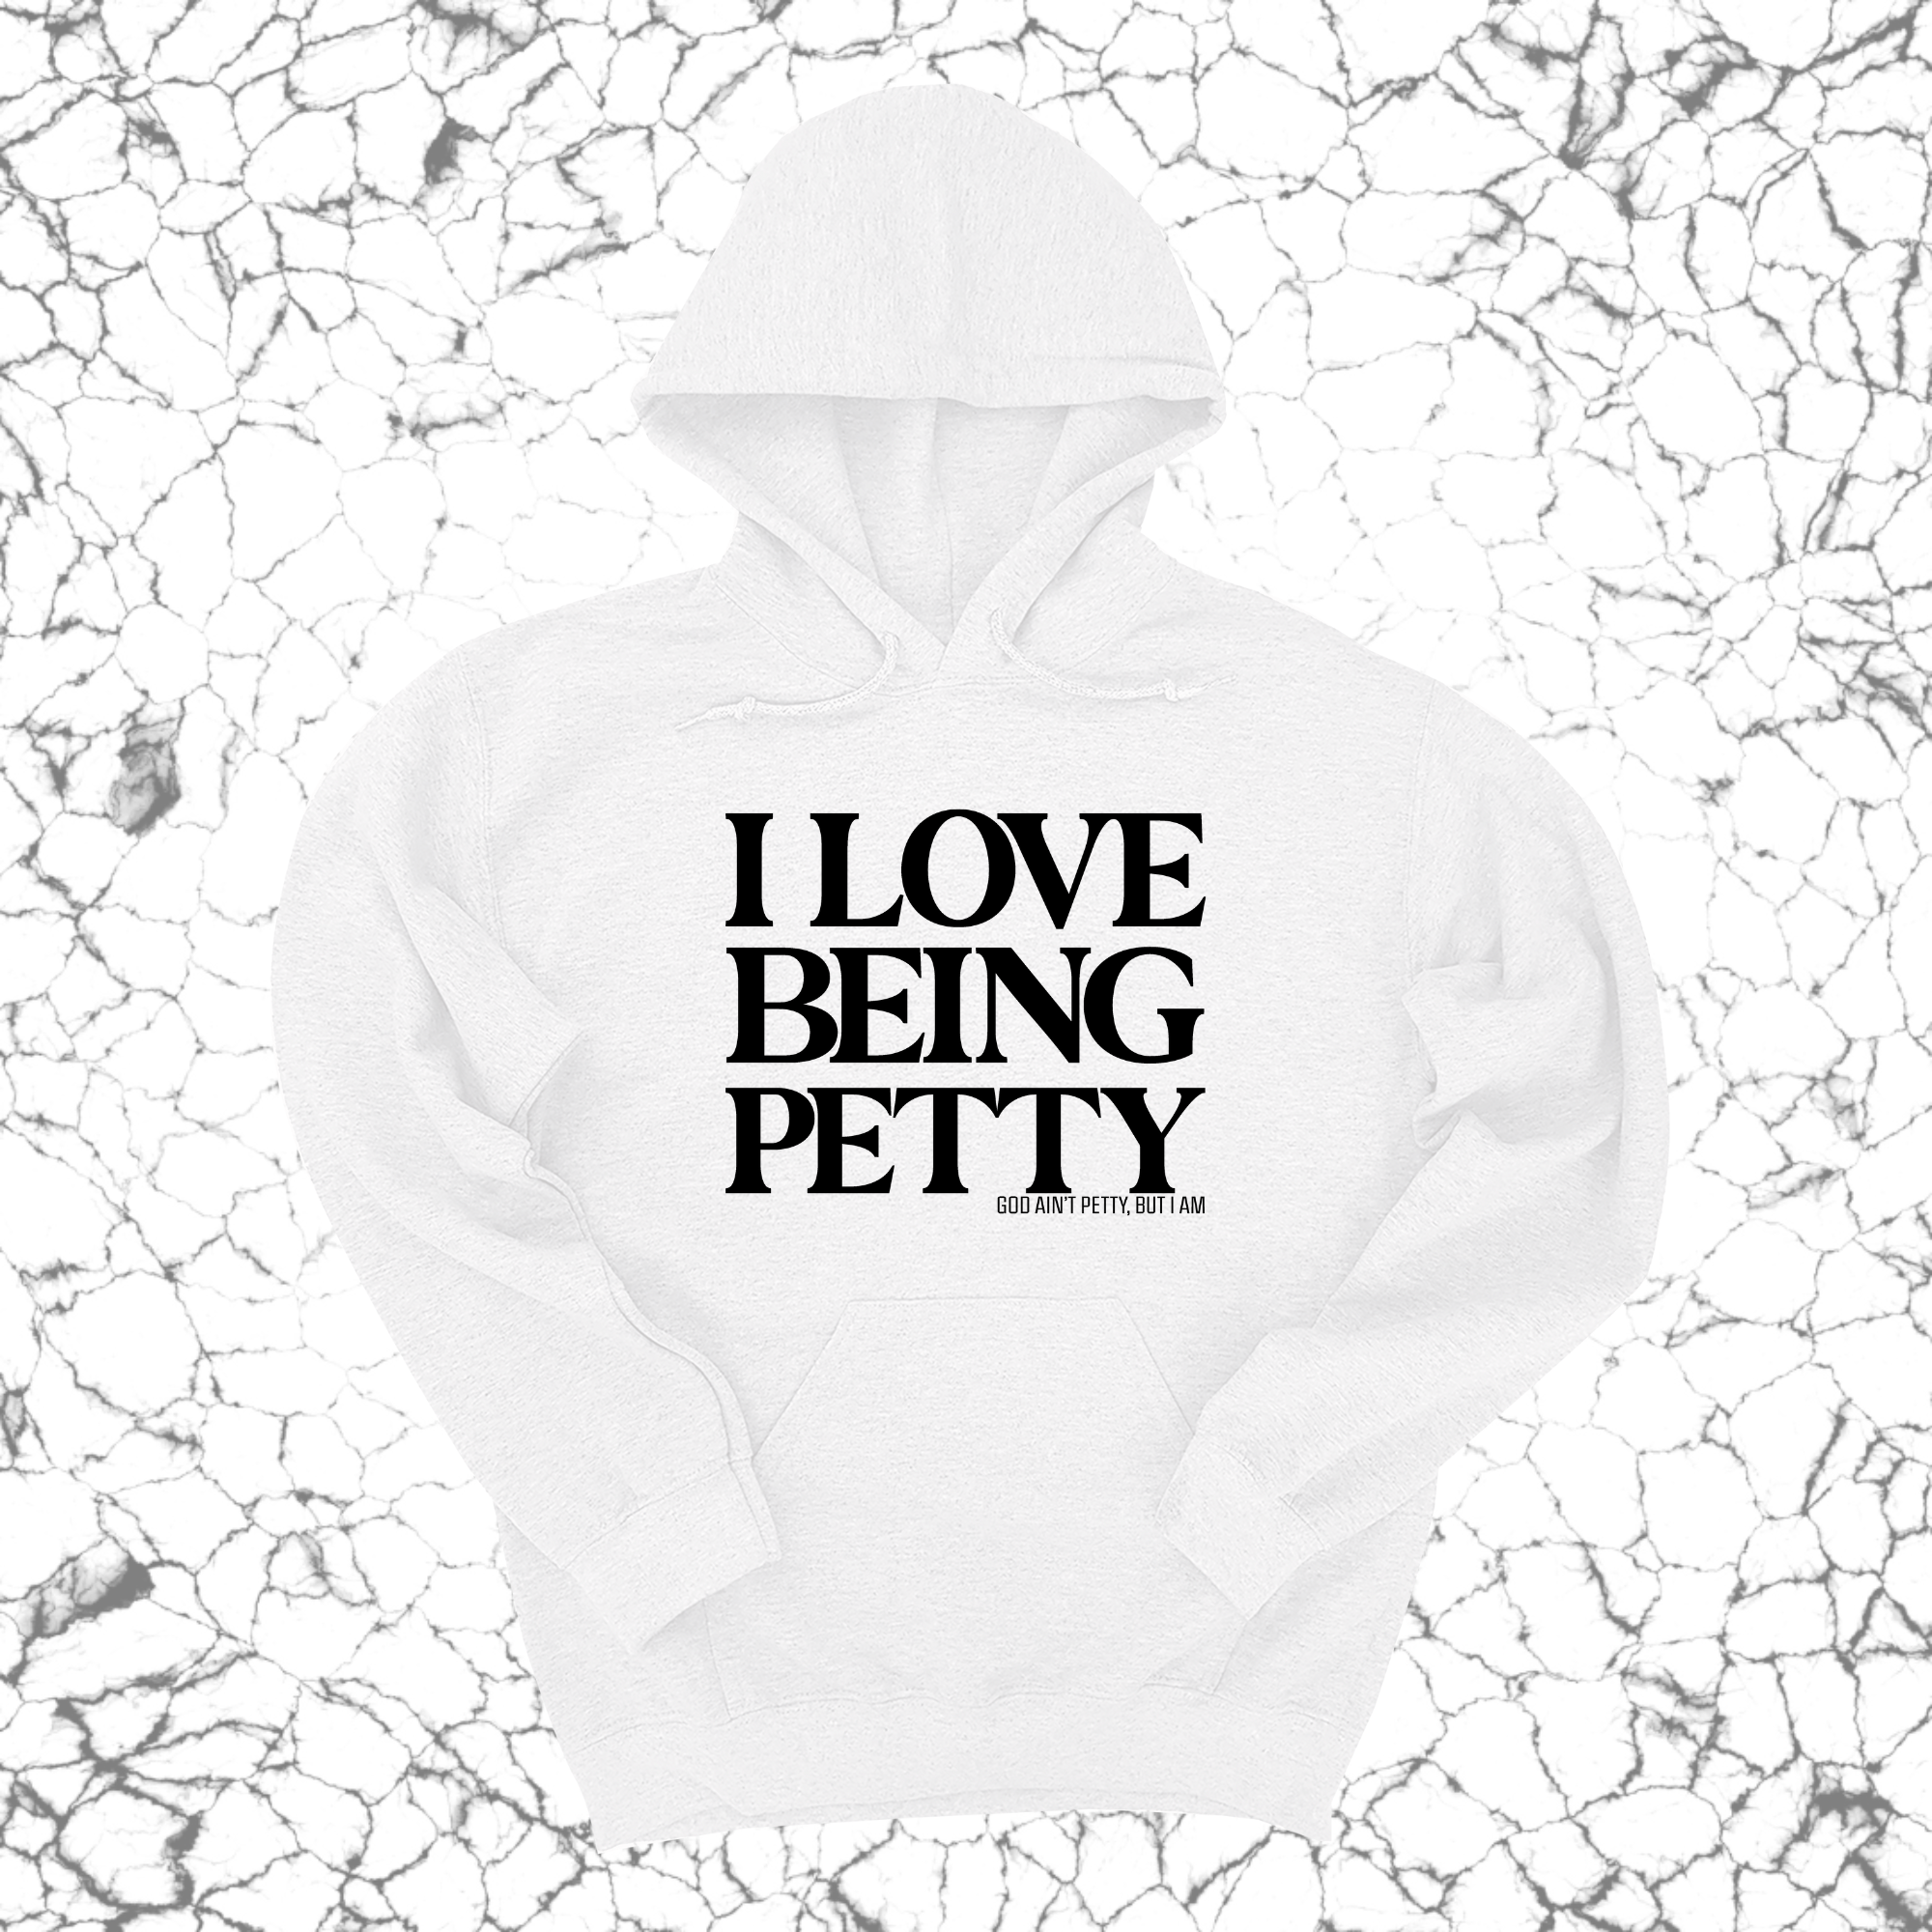 I Love Being Petty Unisex Hoodie-Hoodie-The Original God Ain't Petty But I Am